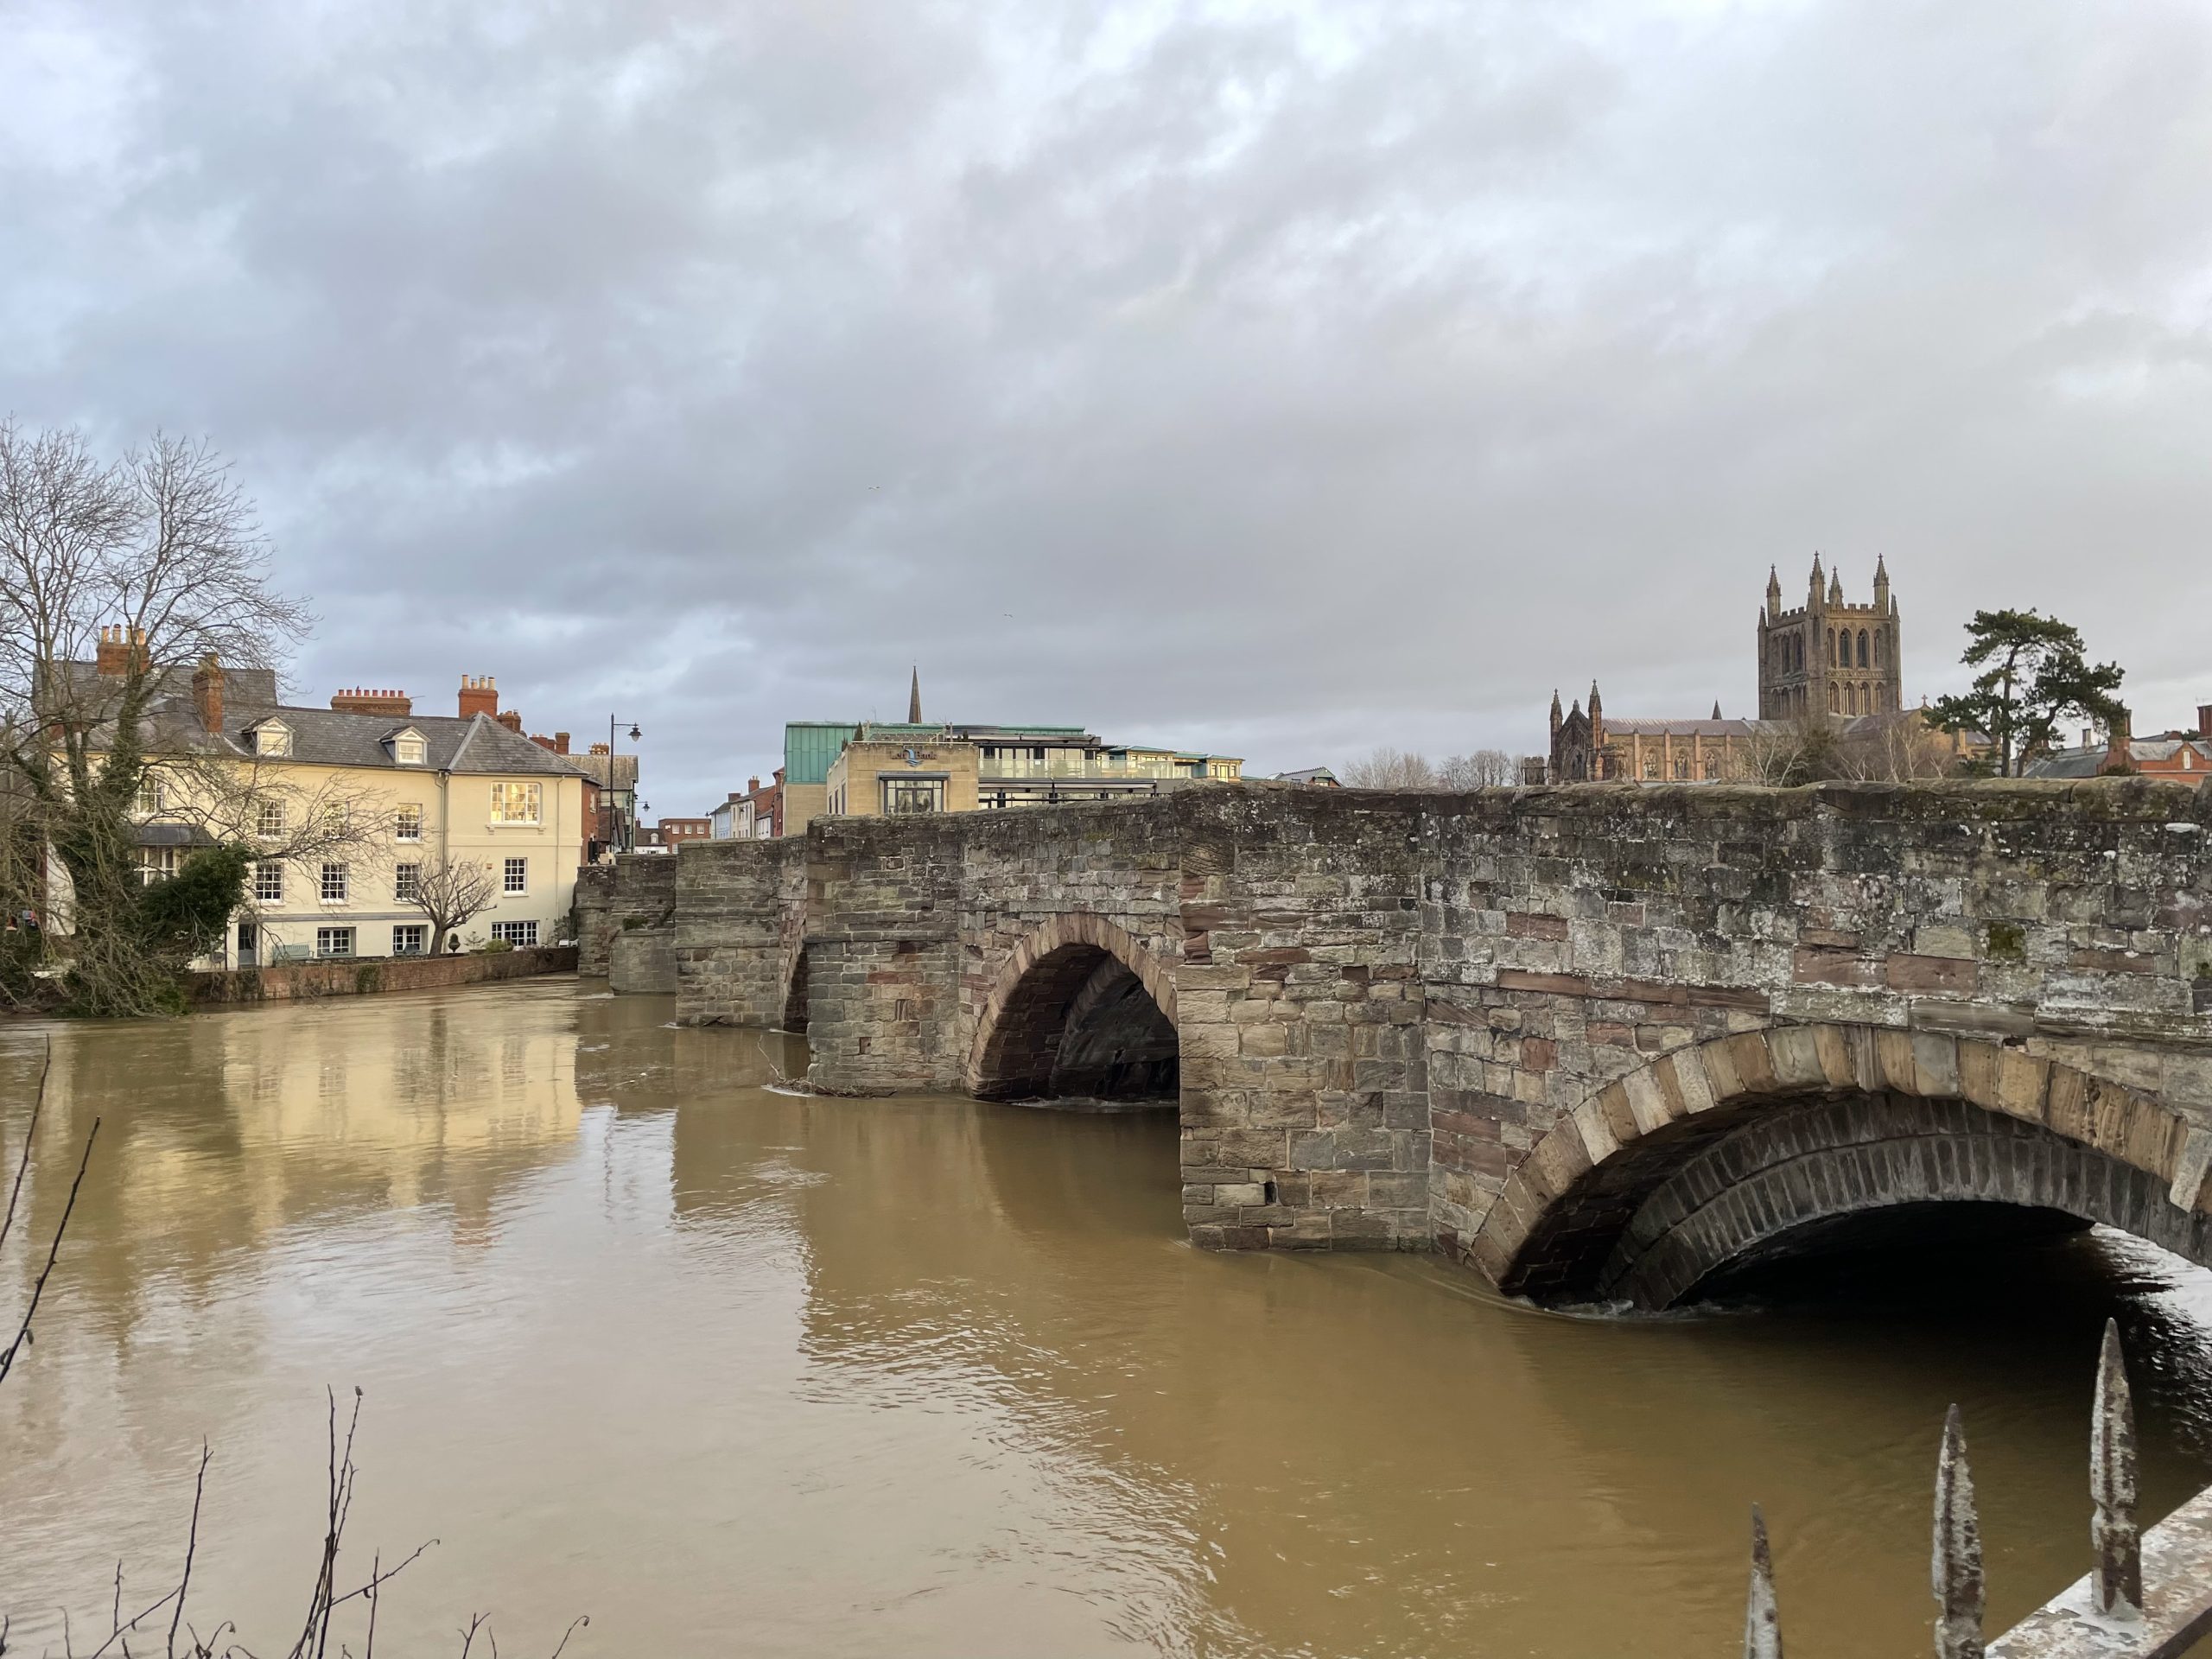 NEWS | River Wye could reach levels of around 5 metres in Hereford tomorrow as Storm Franklin hits UK